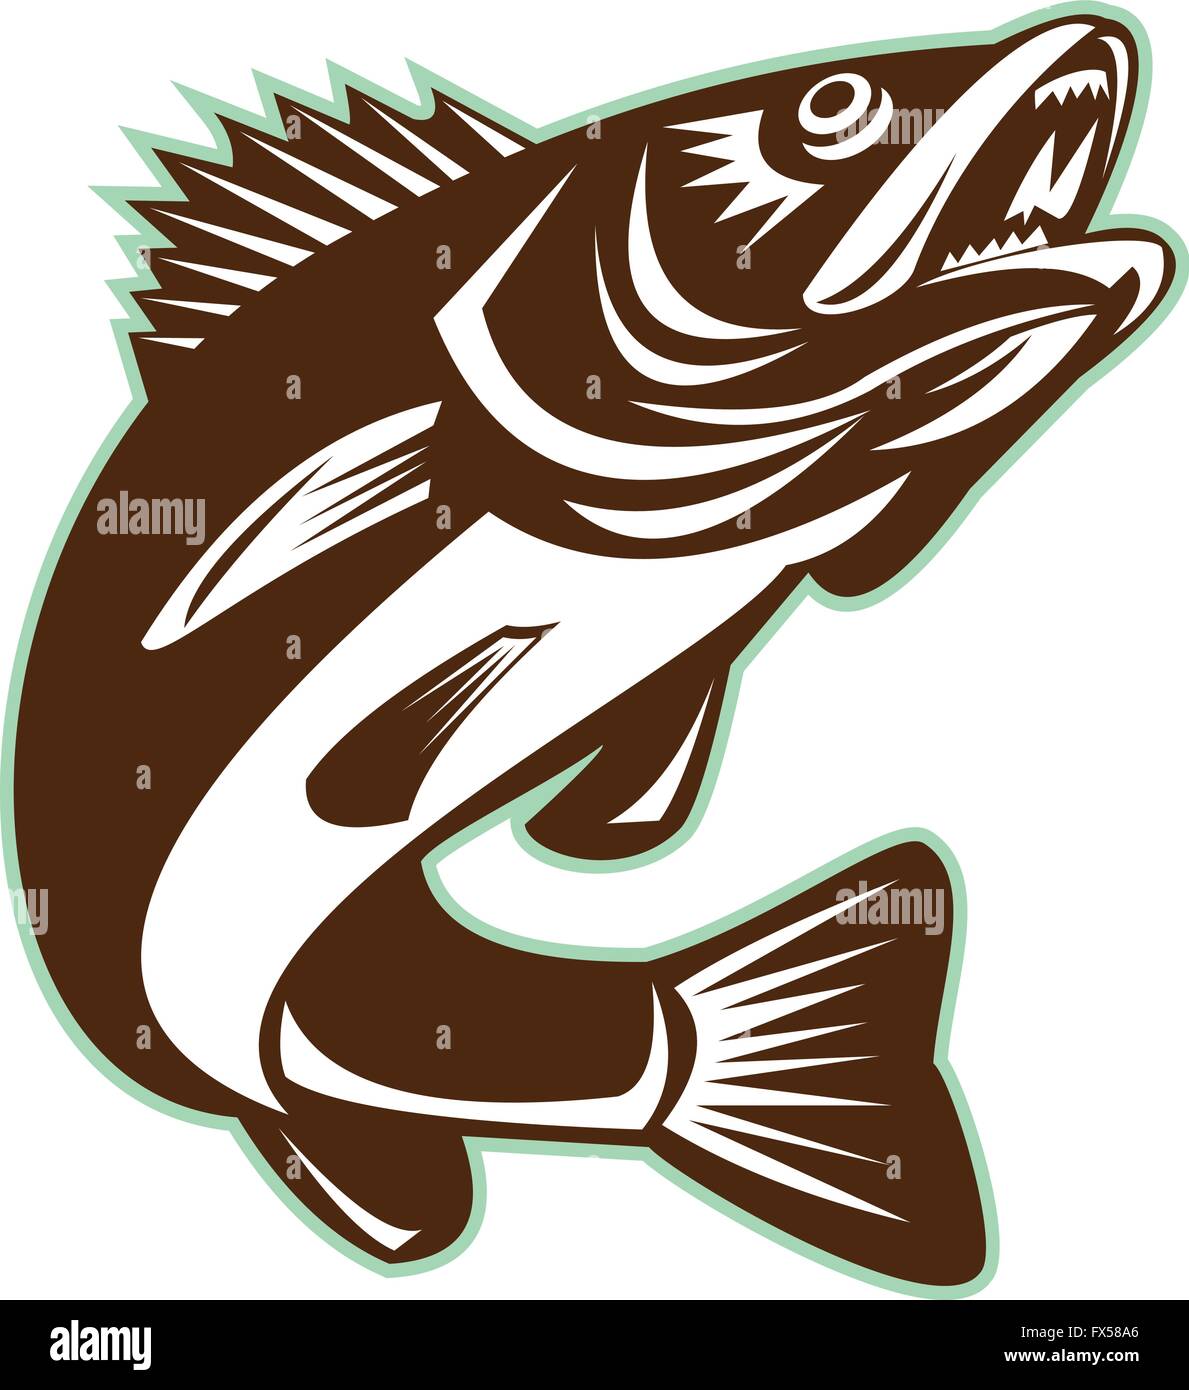 Illustration of a Walleye (Sander vitreus, formerly Stizostedion vitreum), a freshwater perciform fish jumping up on isolated background done in retro style. Stock Vector